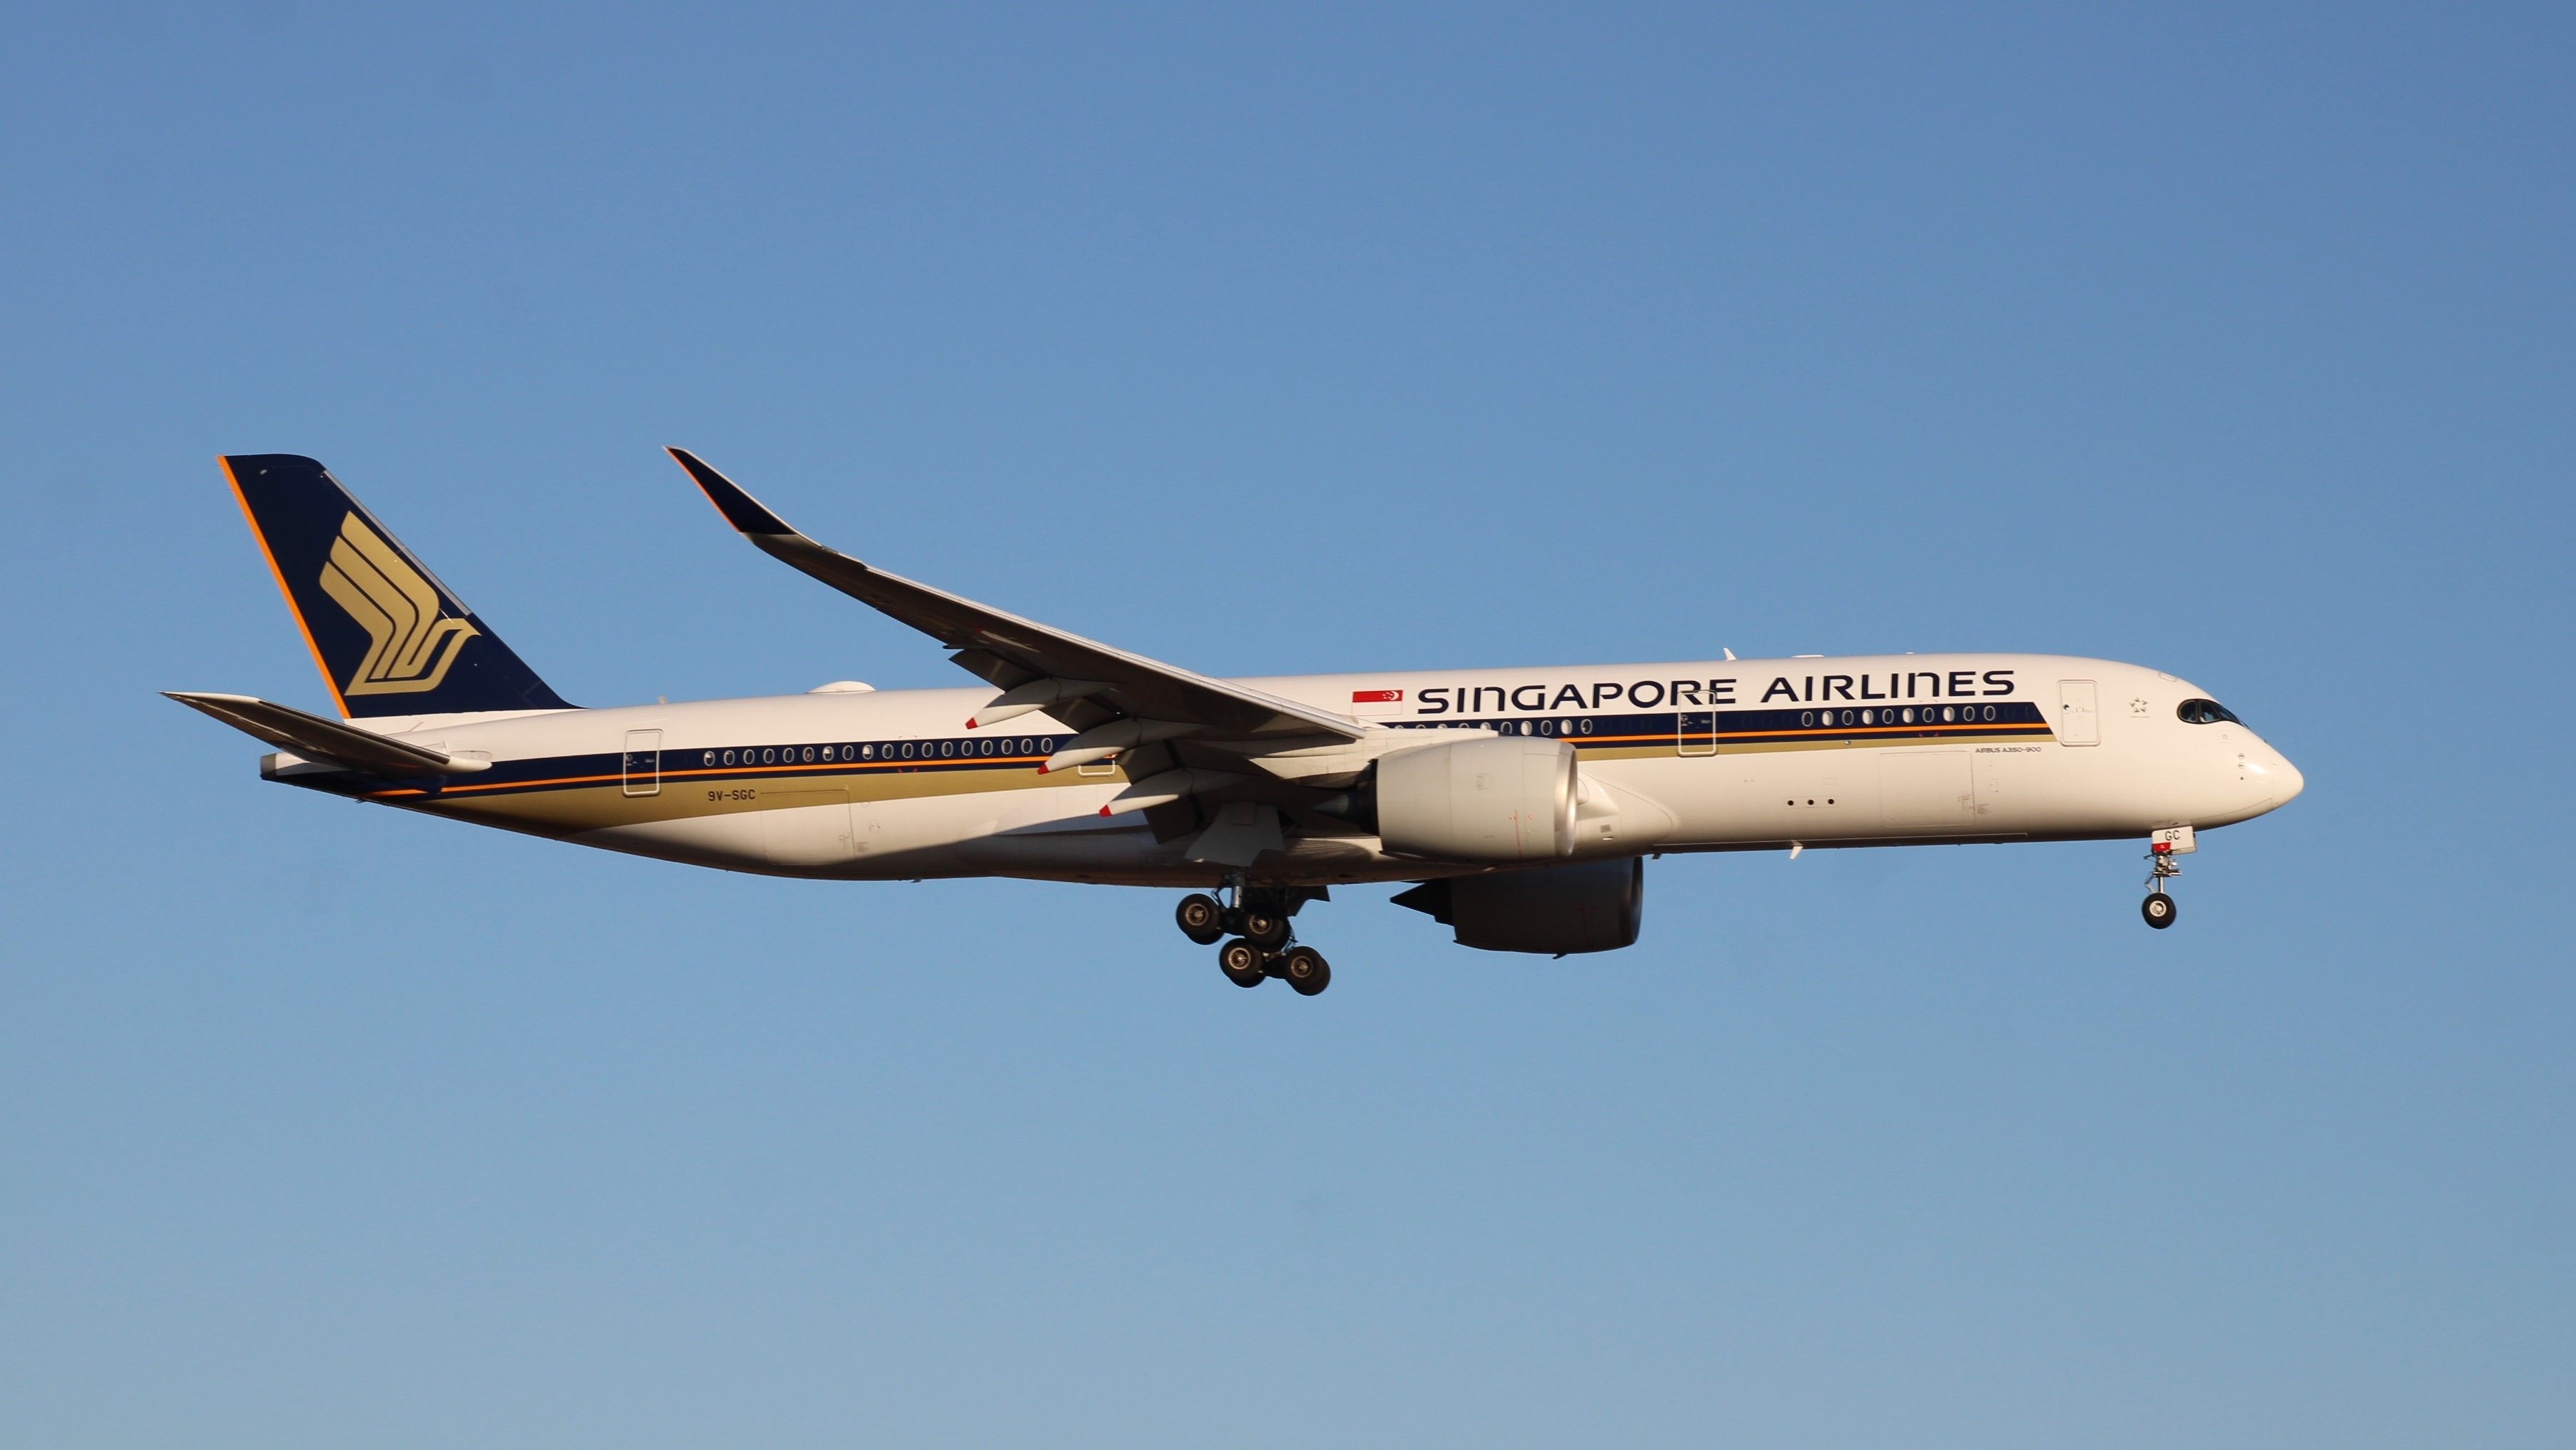 A Singapore Airlines Airbus A350-900ULR flying in the sky.